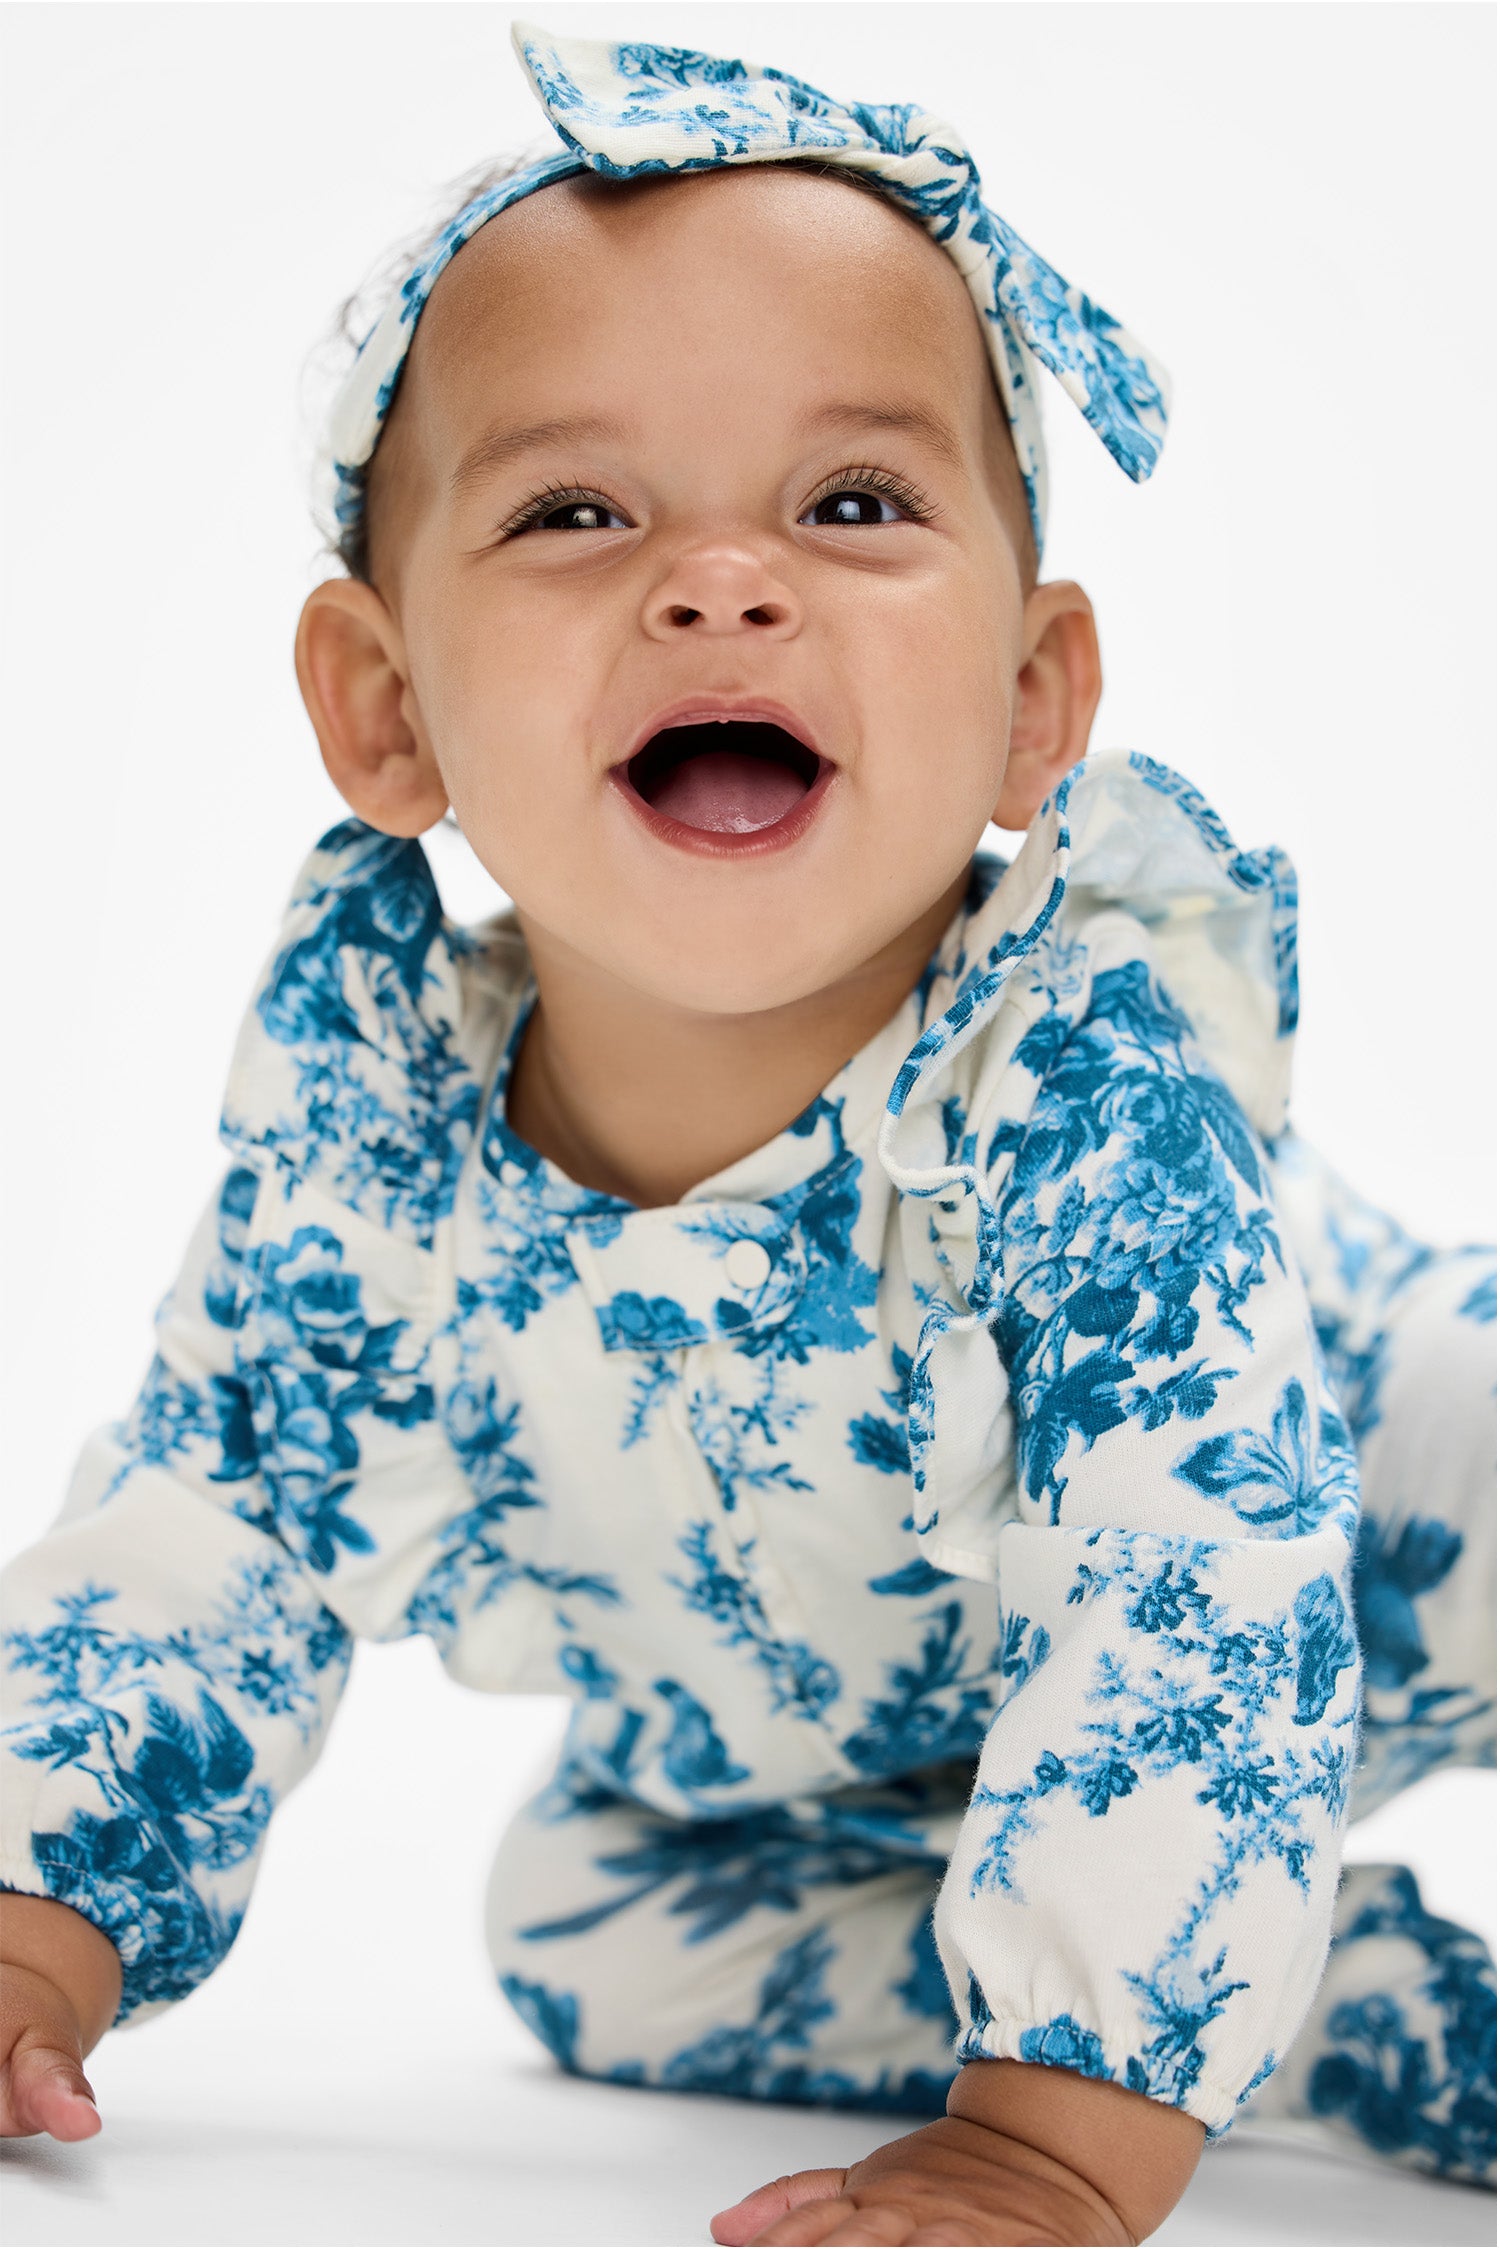 Model wearing Baby's blue floral onesie with matching headband